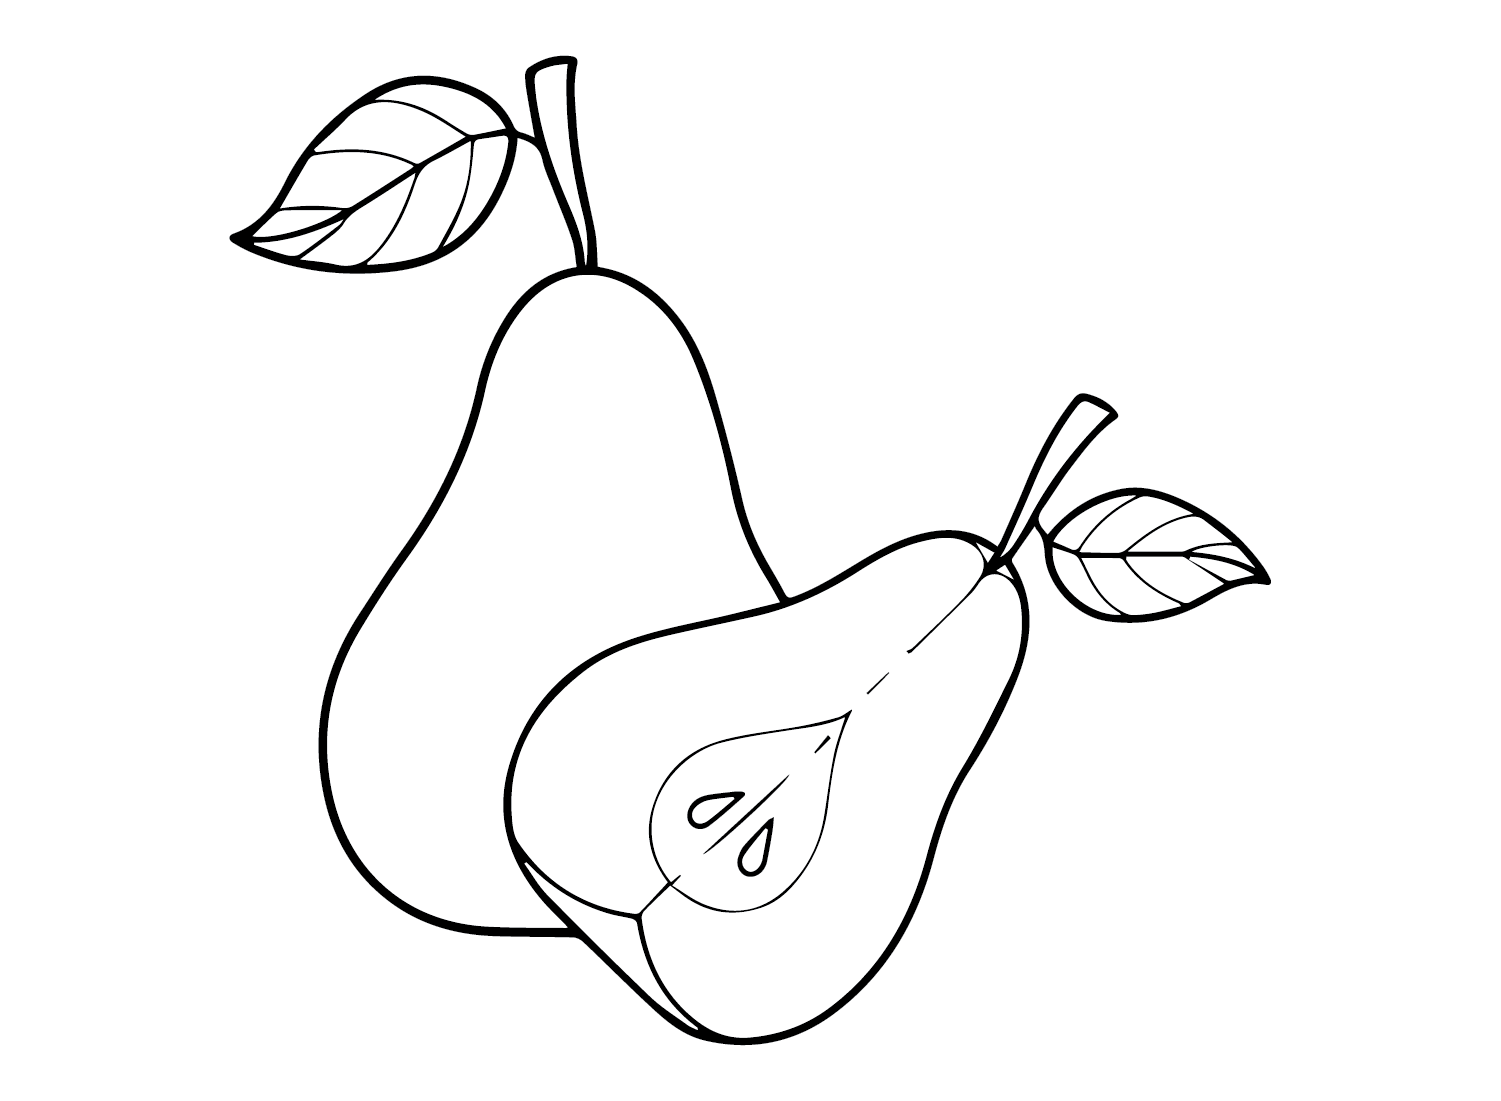 Pears for Kids from Pears